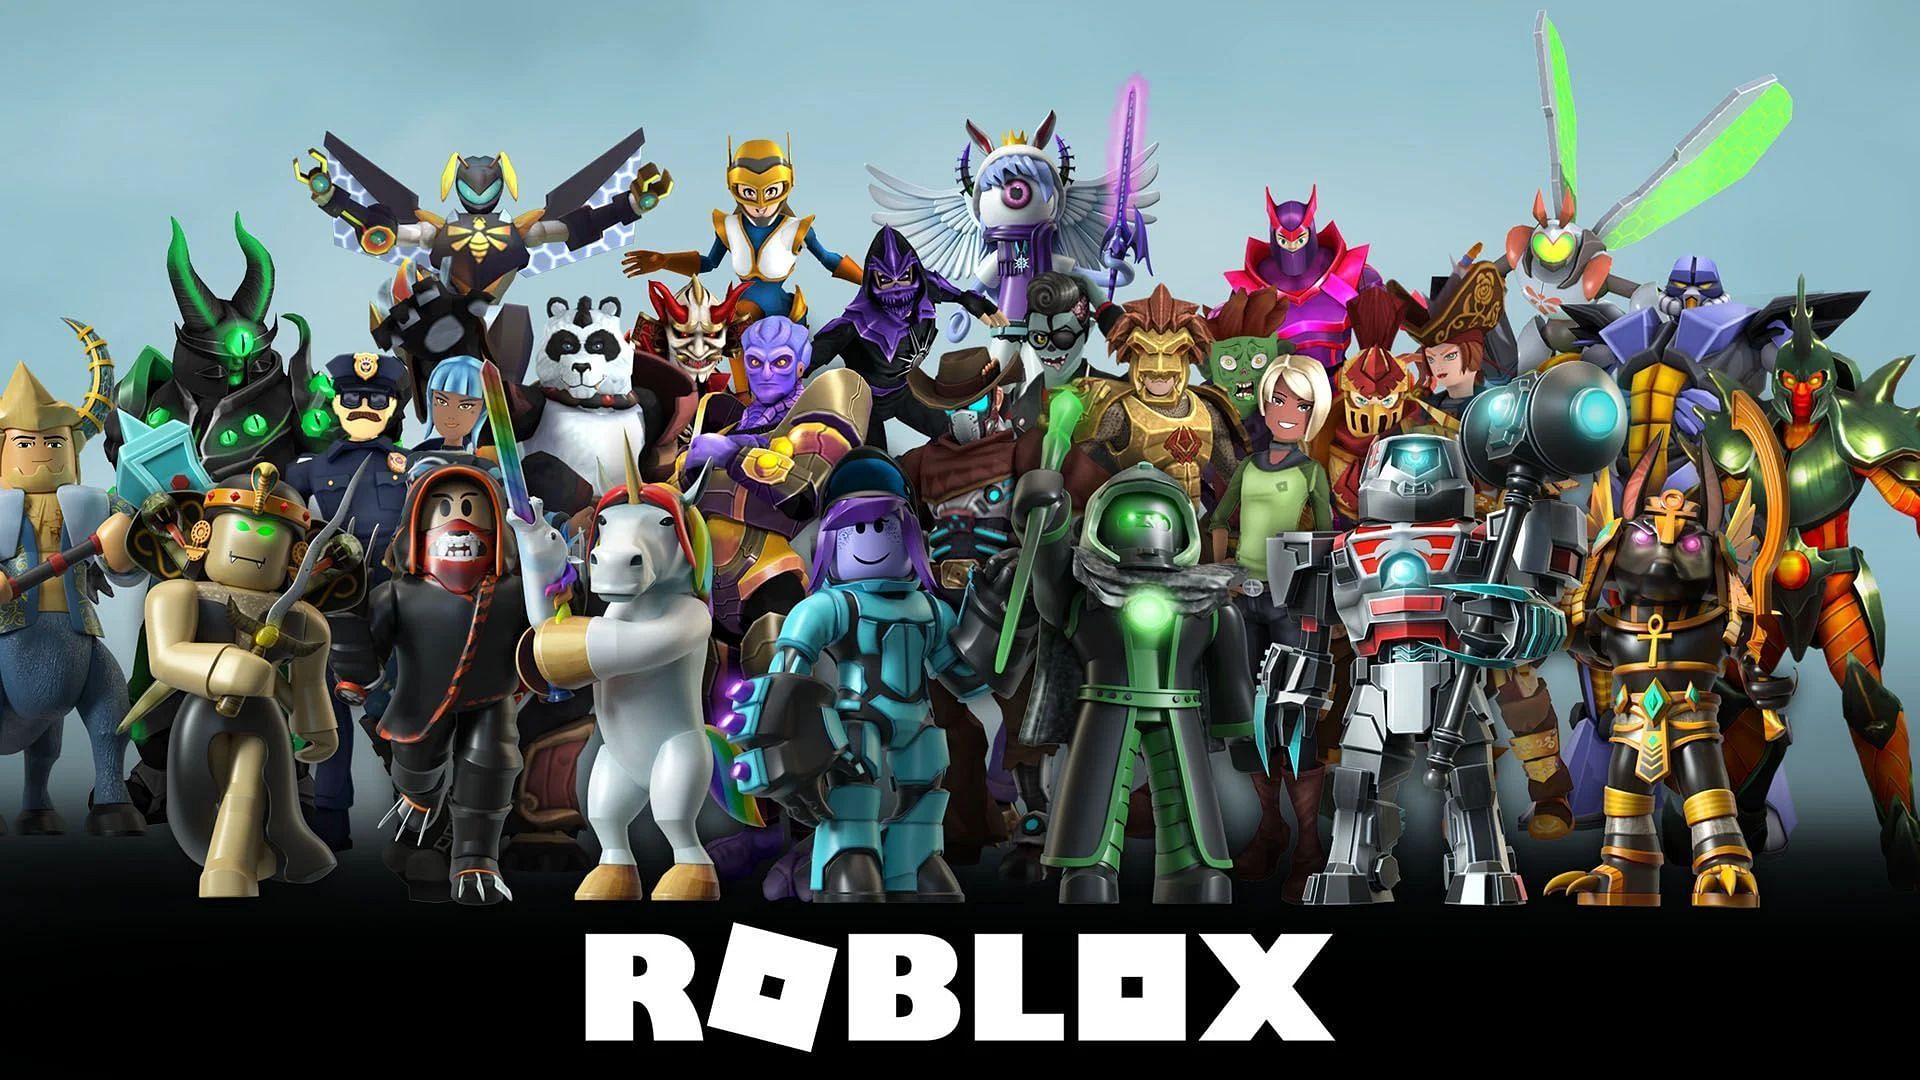 Noob, ROBLOX Bad Business Wiki